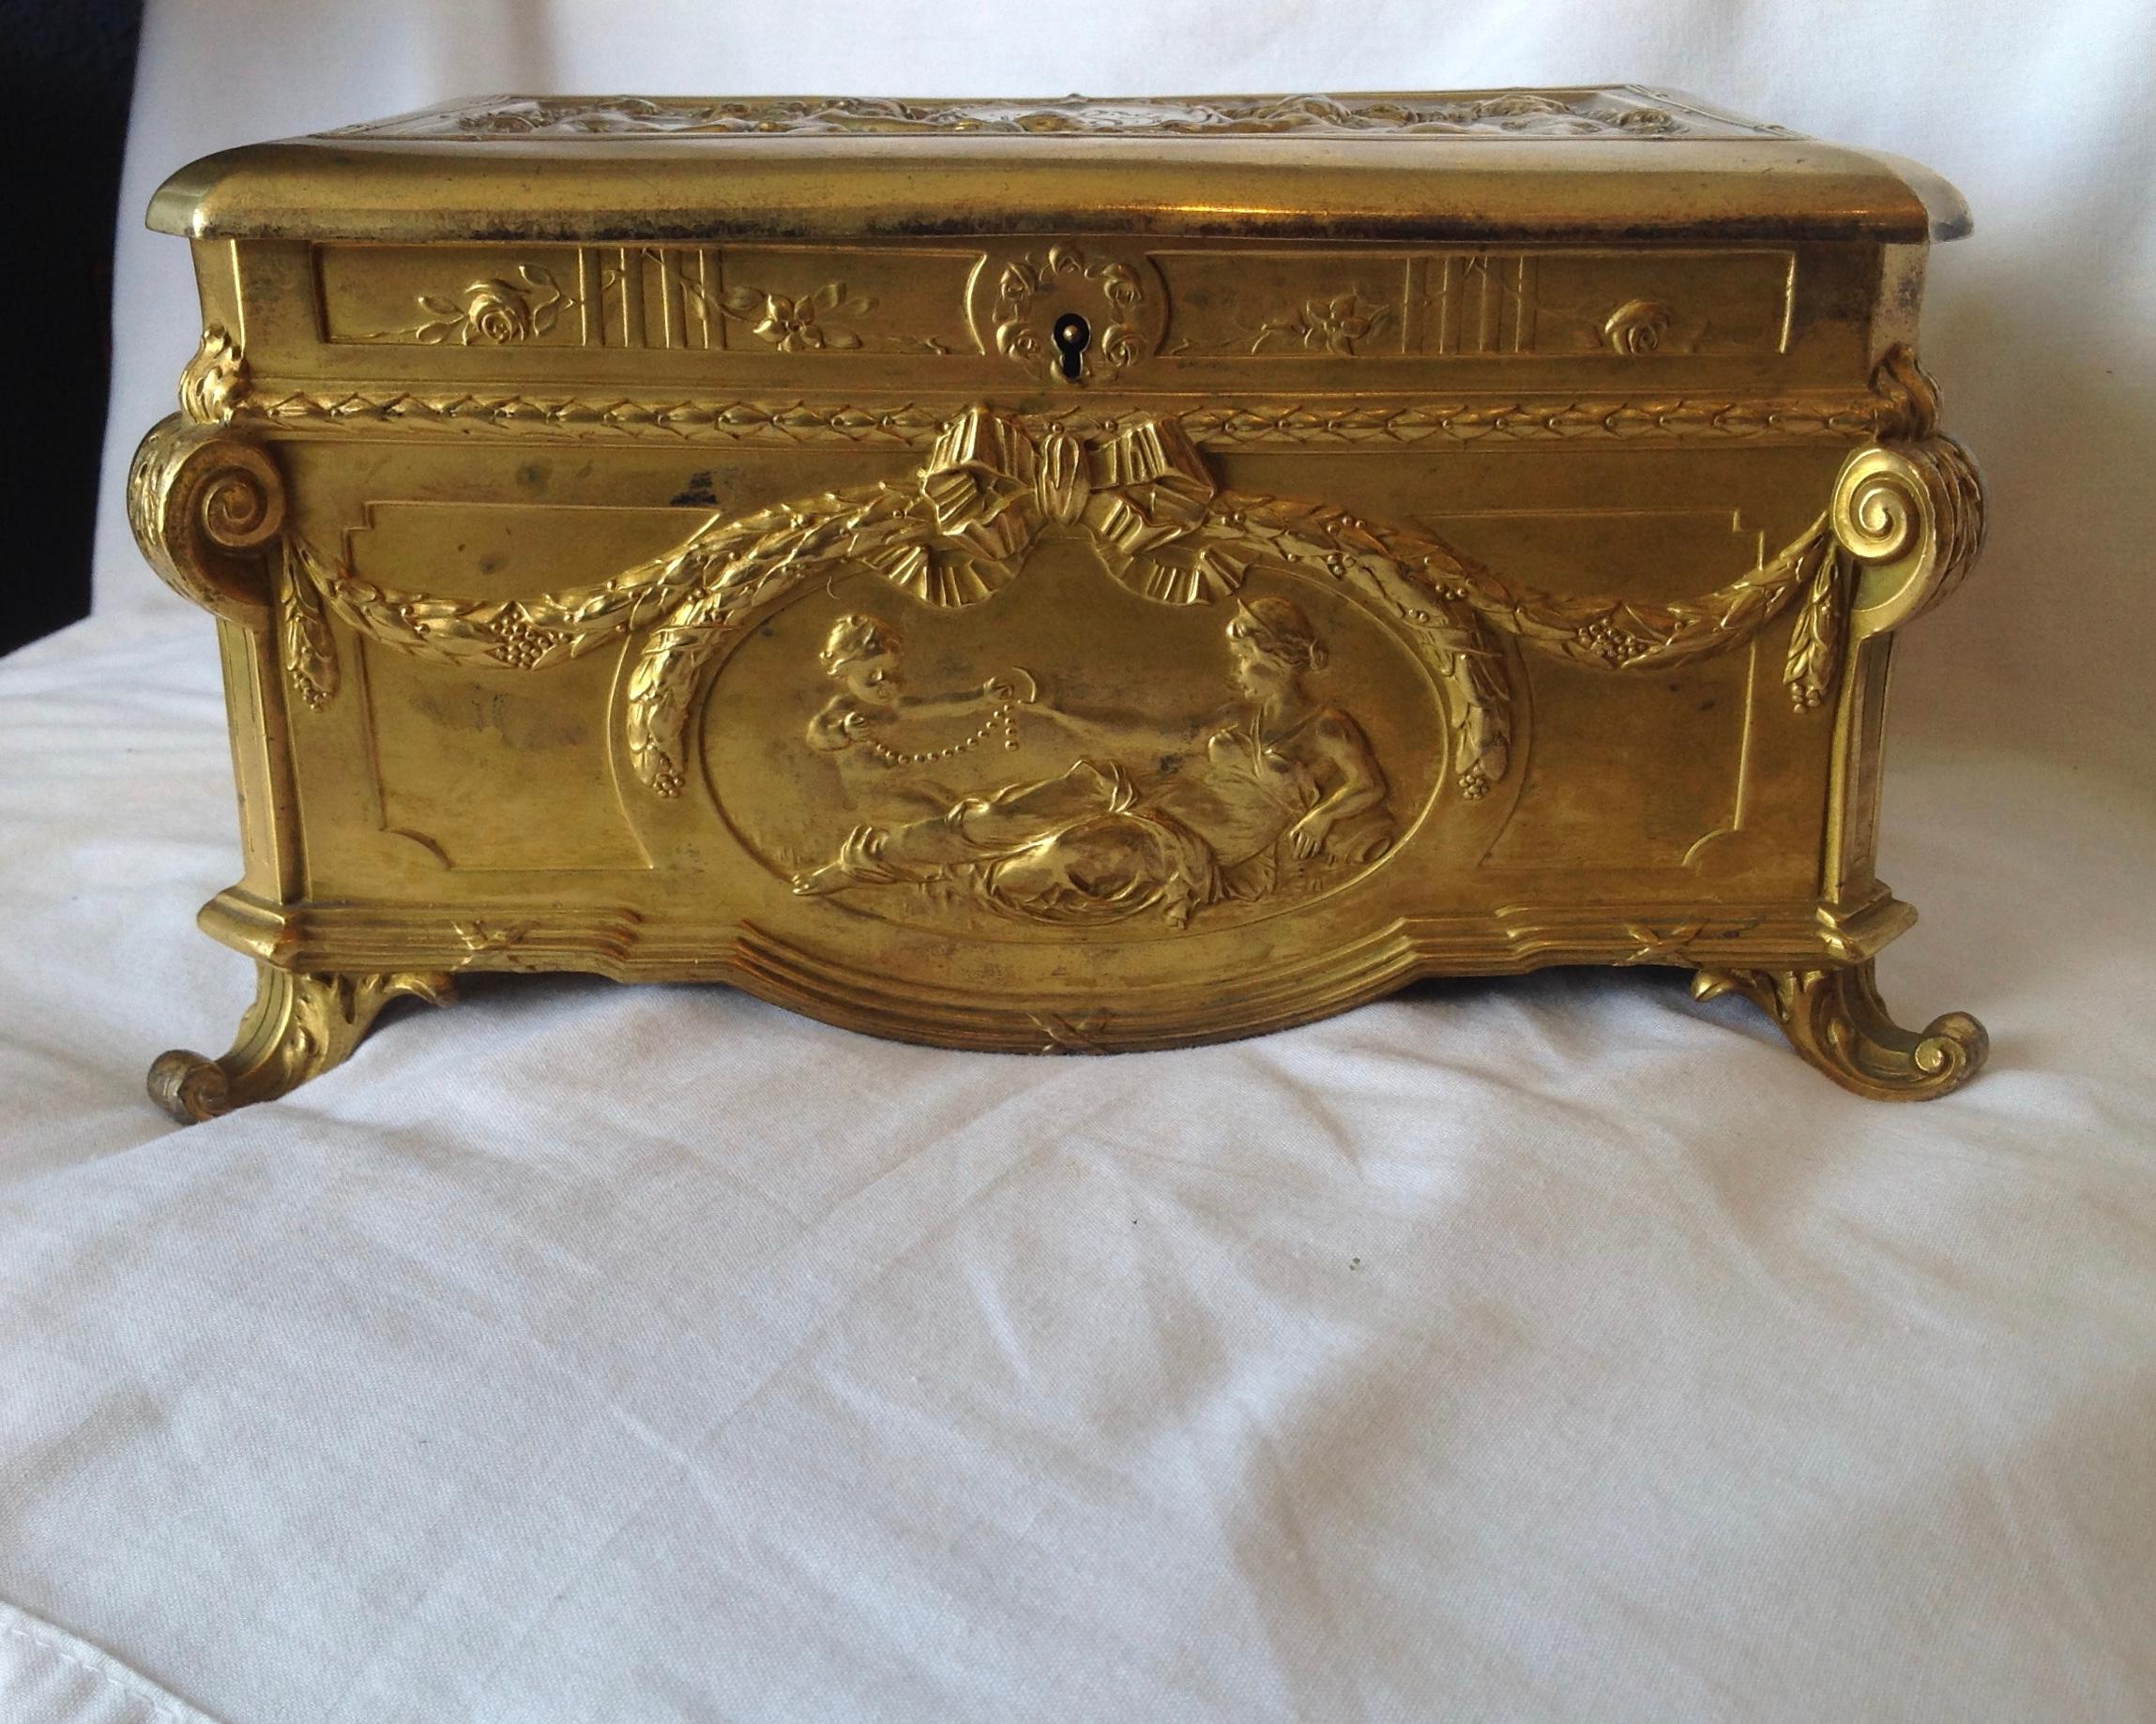 A fine example with classical medallions front and back -
complemented by an elaborate top fashioned with cherubs.
Opulent design. The box is velvet lined.